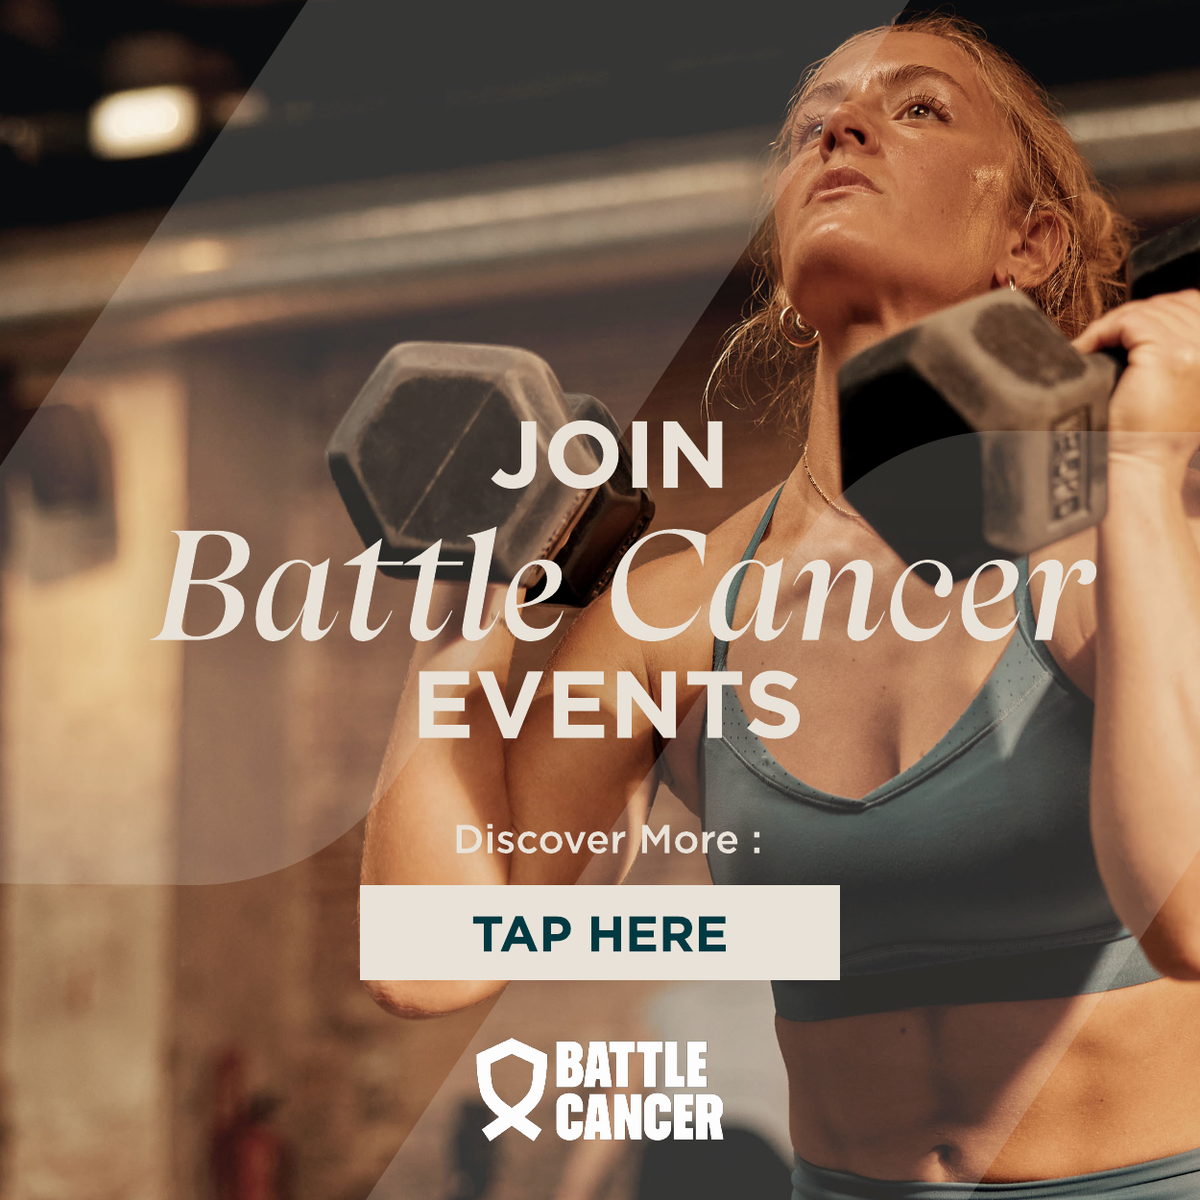 Join Battle Cancer Events. Find out more. Tap Here.